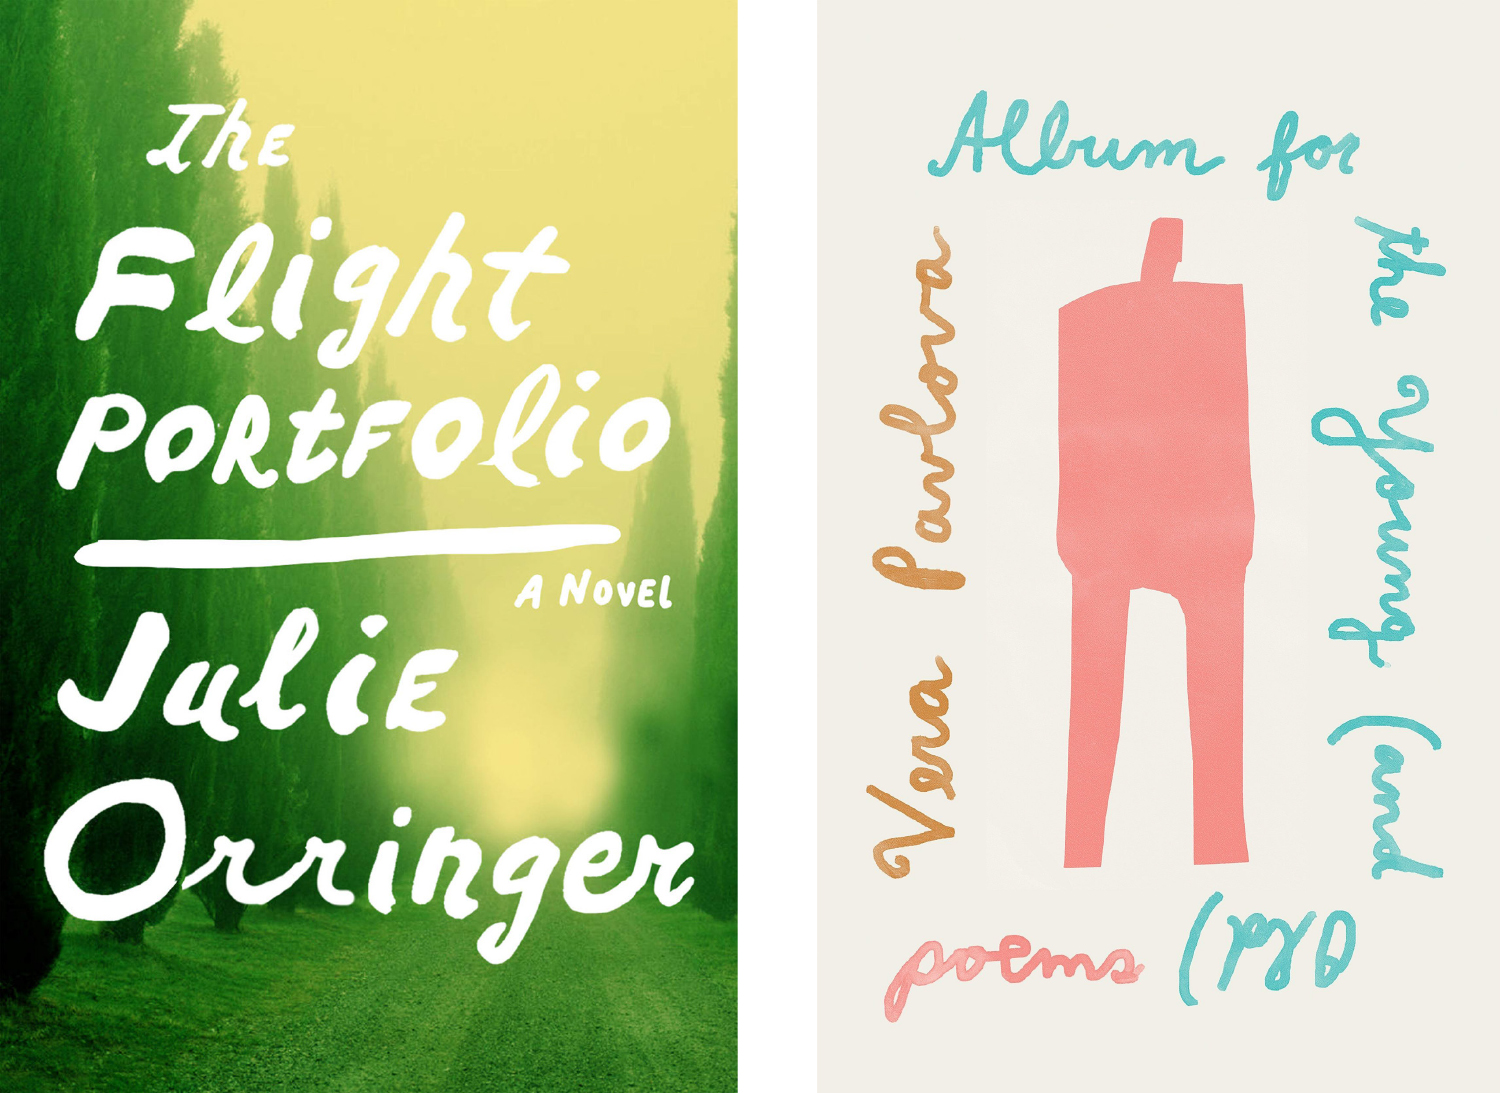 The Flight Portfolio and Album for the Young covers